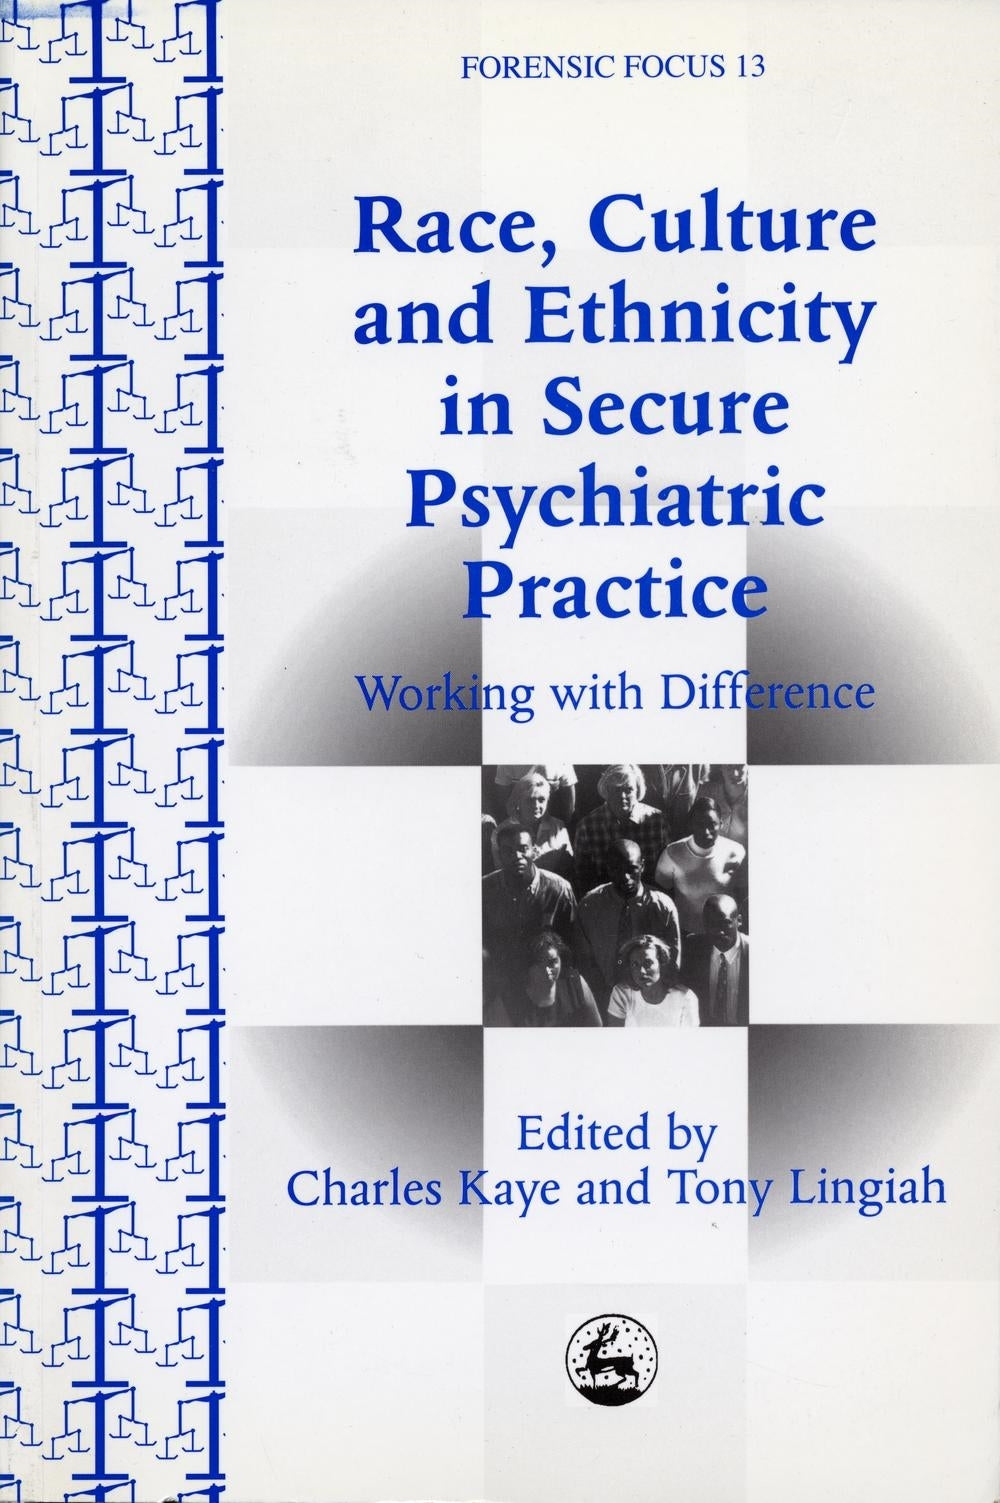 Race, Culture and Ethnicity in Secure Psychiatric Practice by Charles Kaye, Tony Lingiah